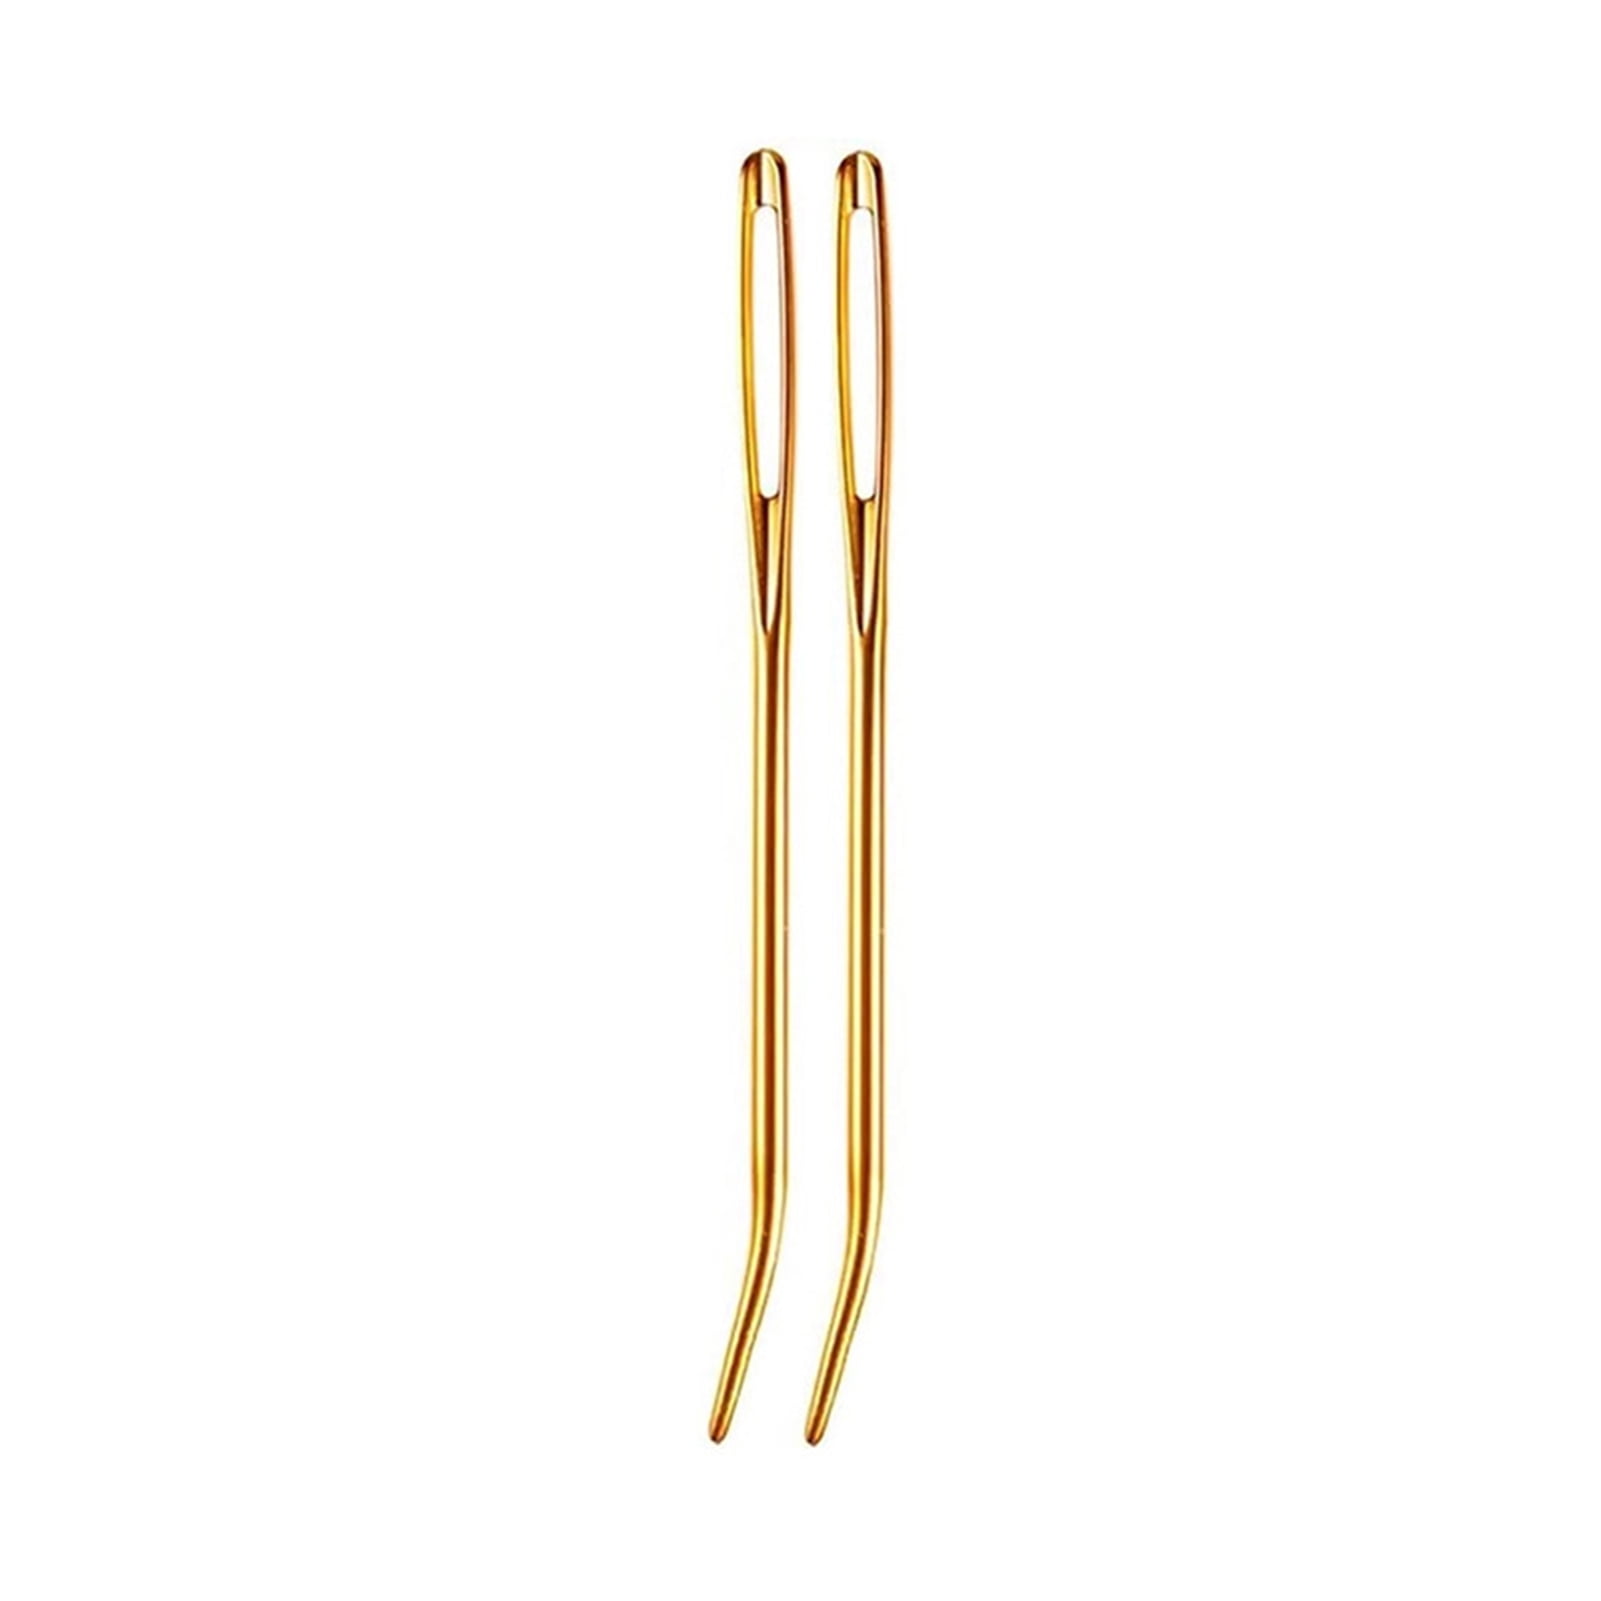 Wirlsweal 2pcs Darning Needles Large Eye Aluminum Wool Sweater Sewing Knitting Crocheting Blunt Needles for Clothes, Gold